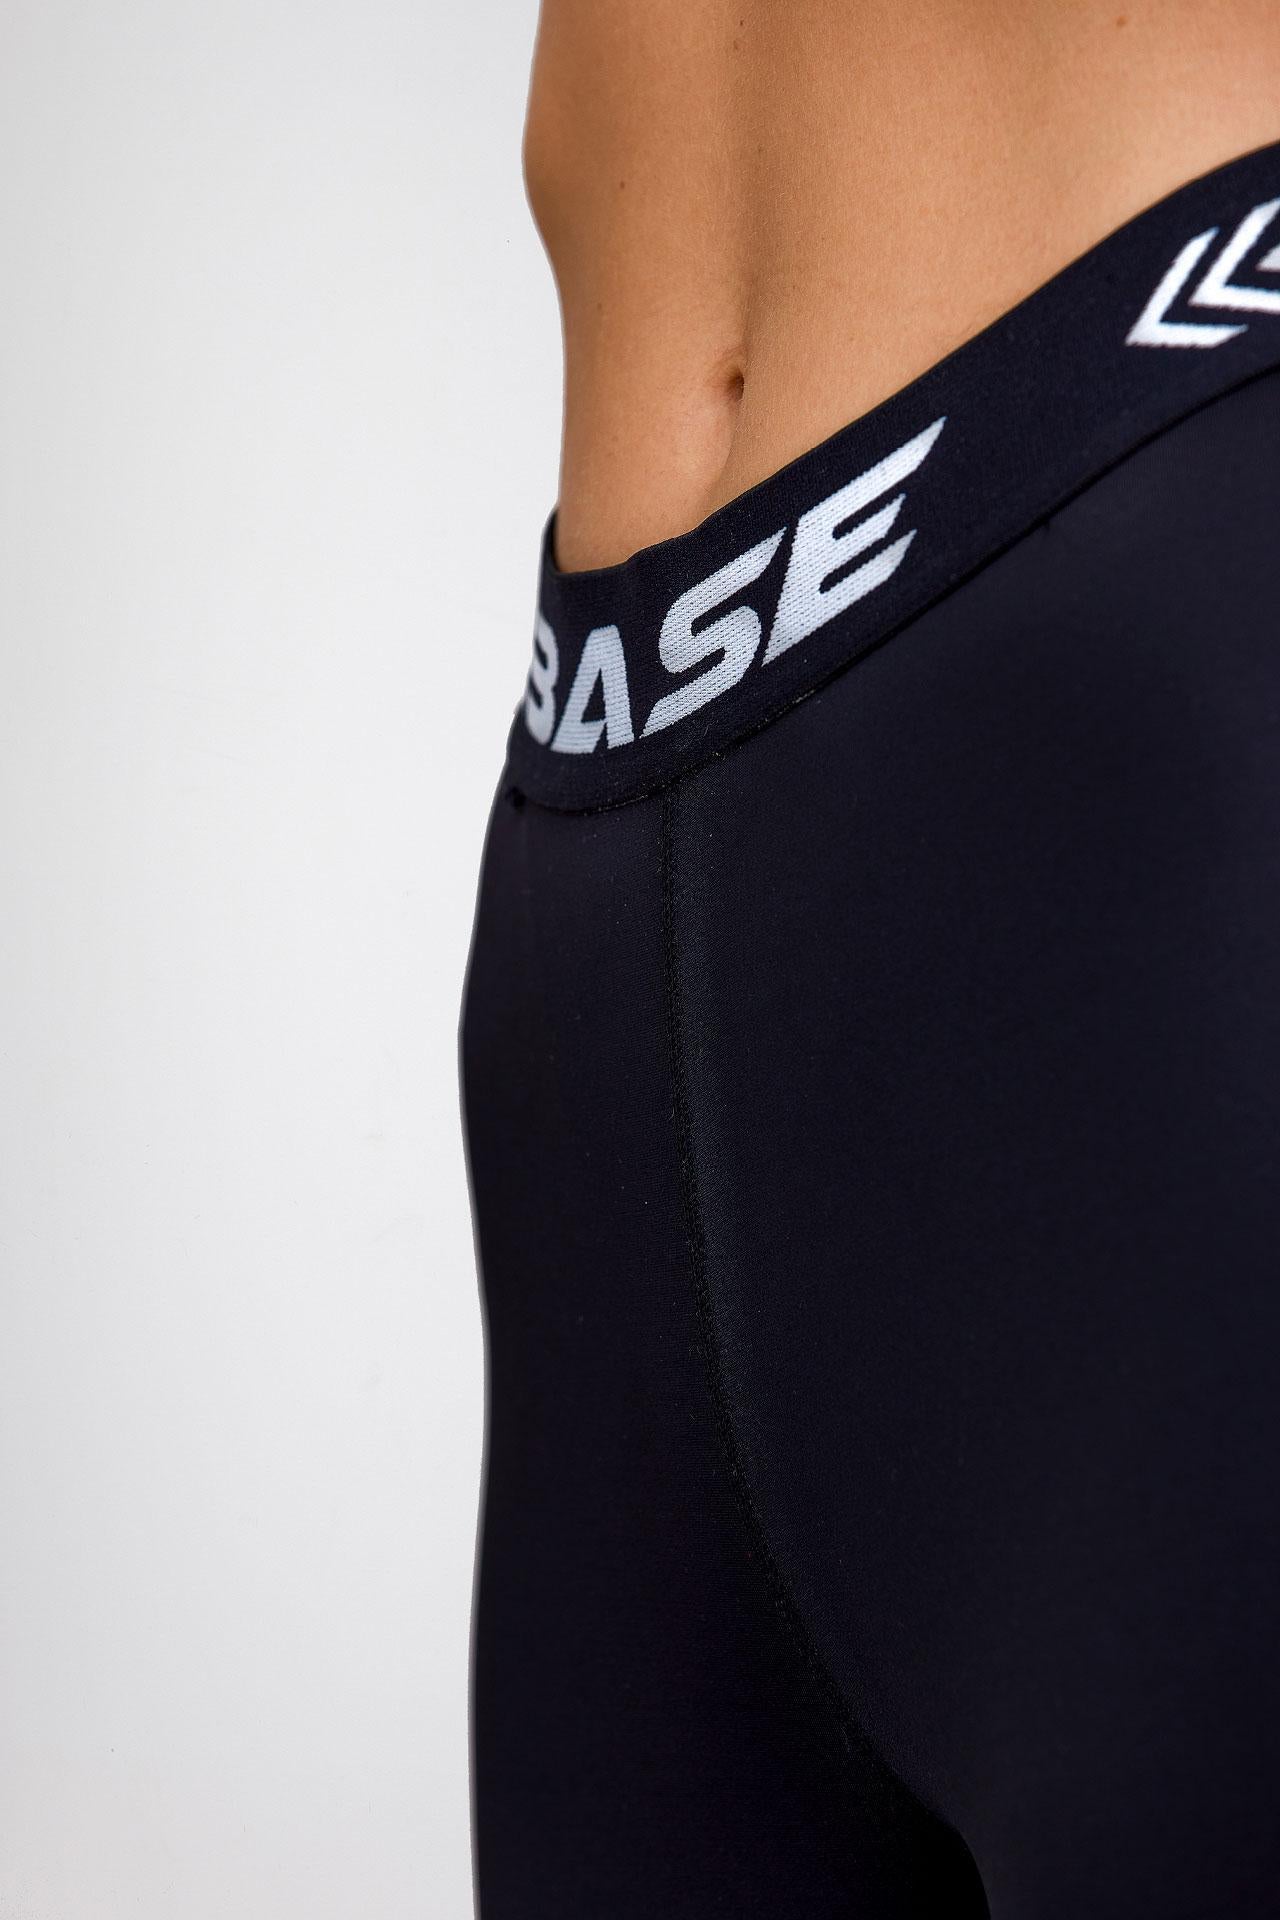 BASE Women's Compression Tights - Black - Adelaide 36ers